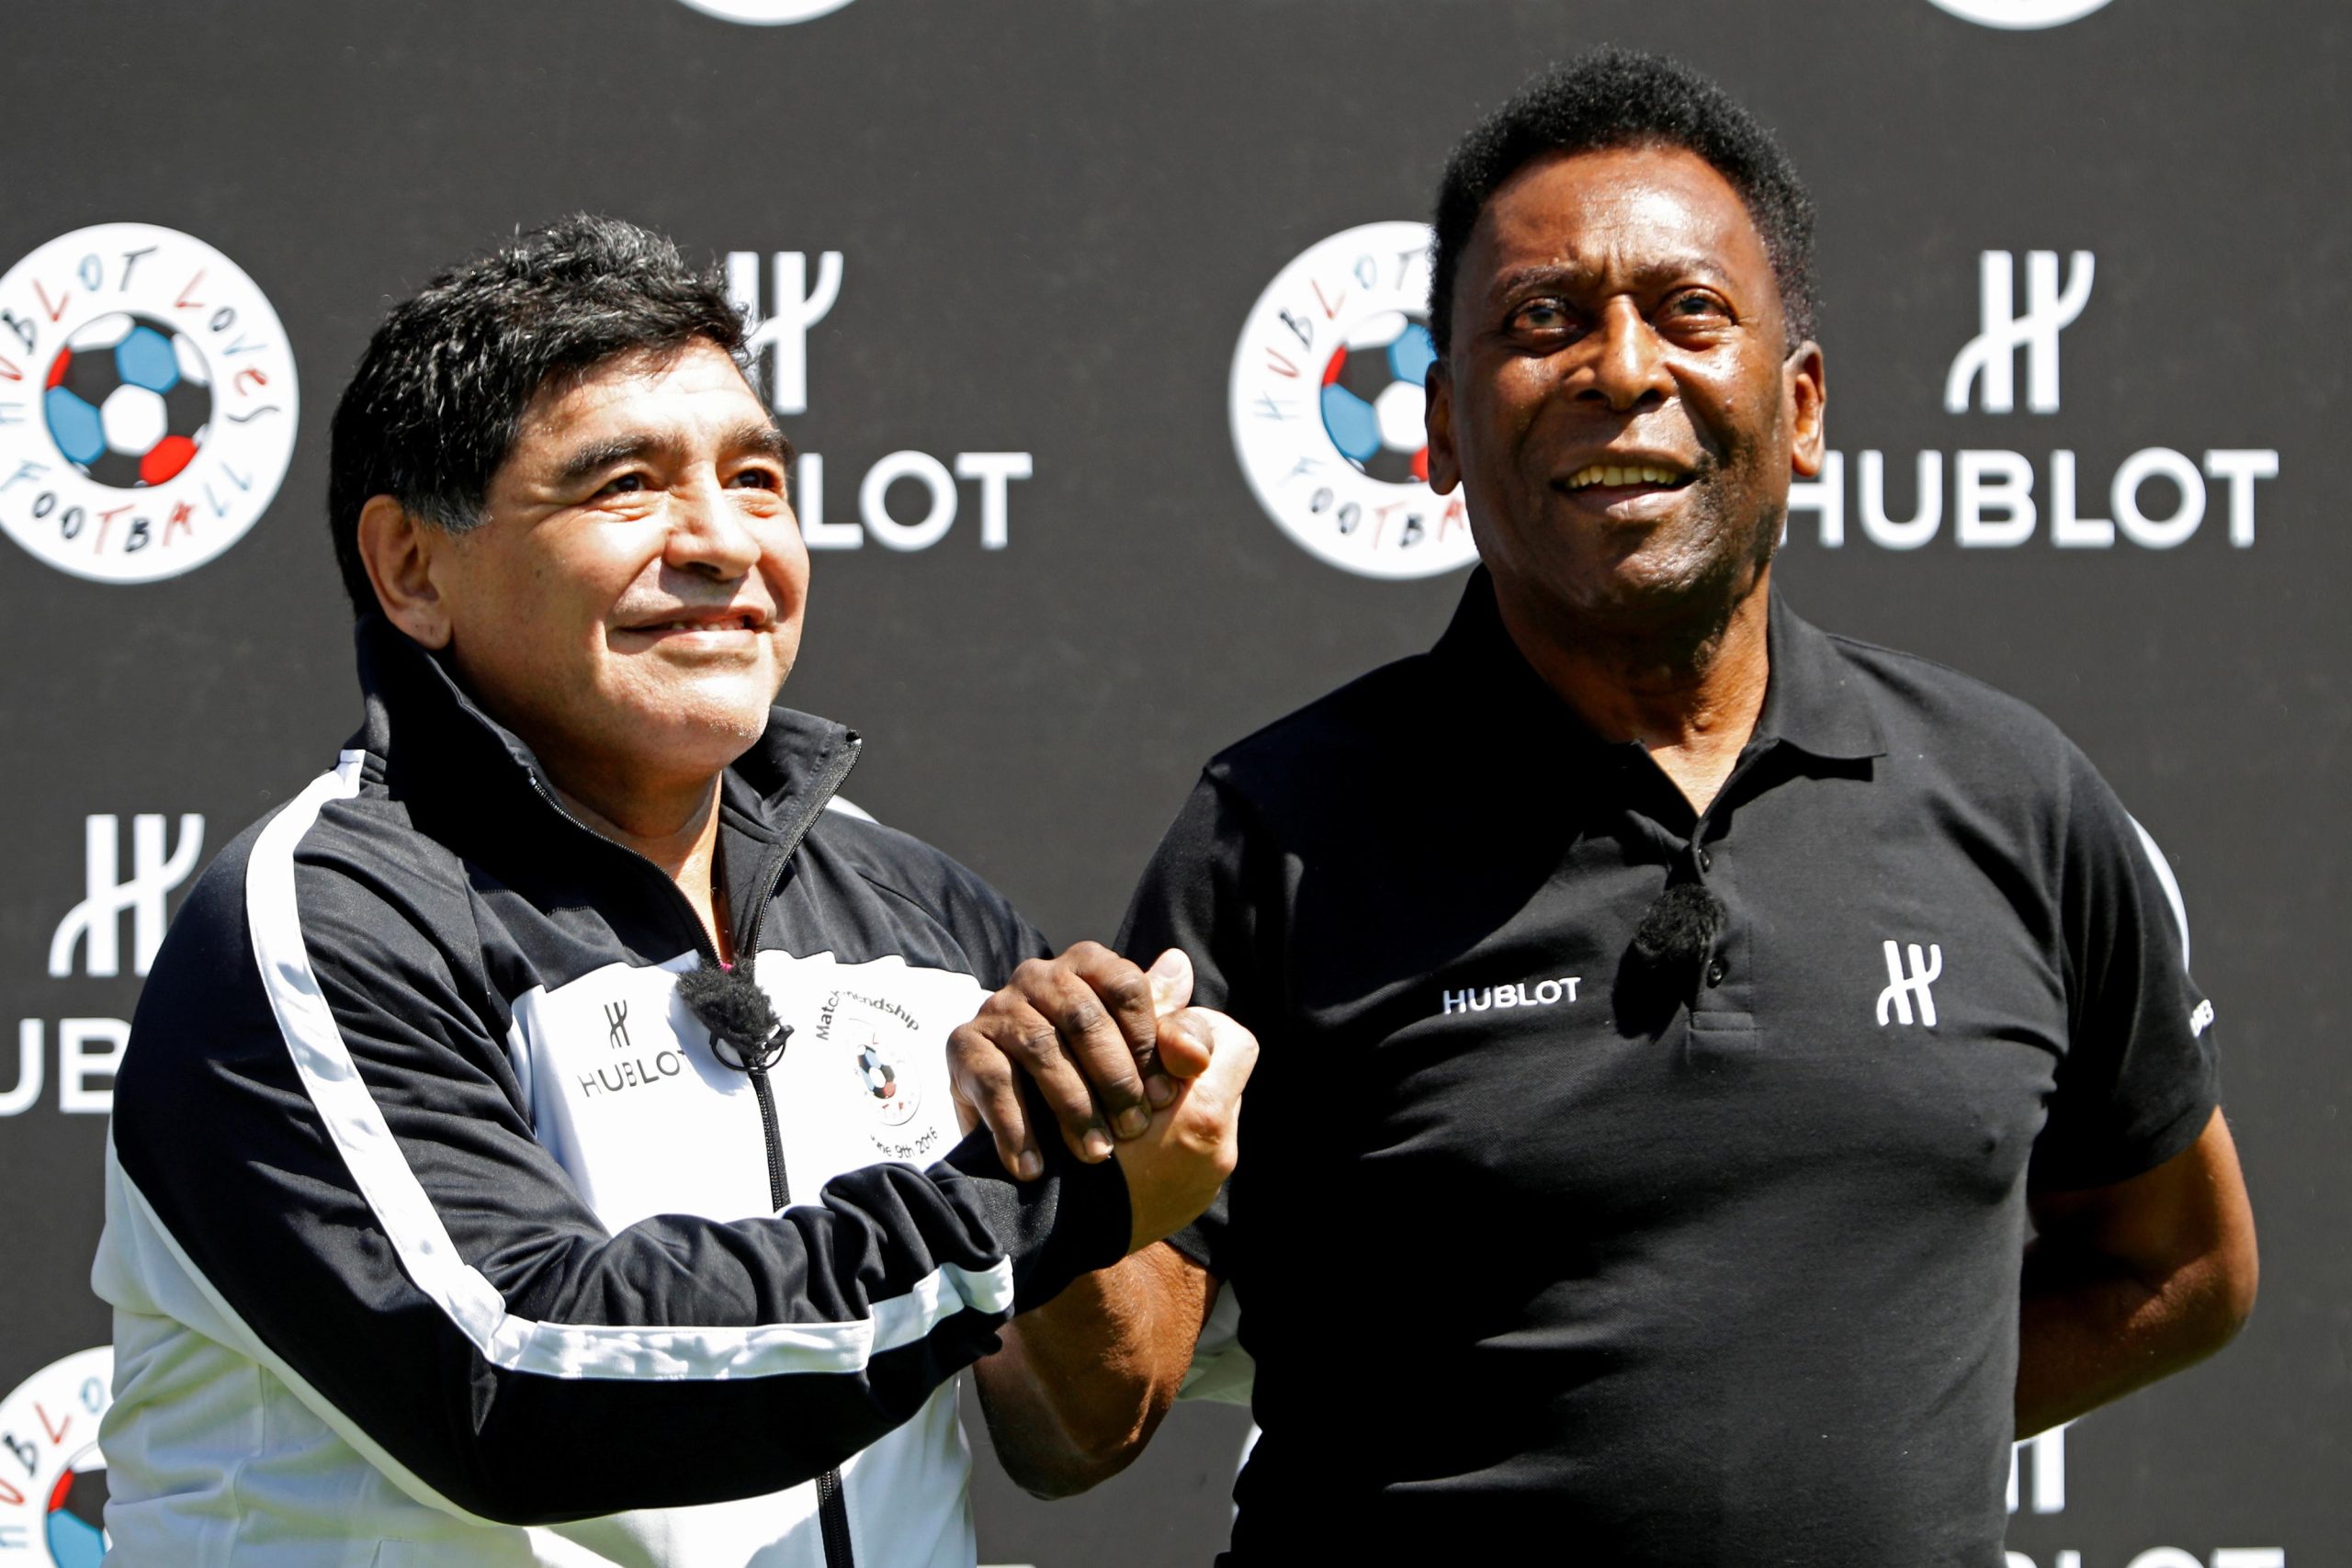 FILE PHOTO: Football legends Pele and Diego Maradona attend an advertising soccer event on the eve of the opening of the UEFA 2016 European Championship in Paris, France June 9, 2016.  REUTERS/Charles Platiau/File Photo SEARCH "1ST ANNIVERSARY OF DIEGO MARADONA'S DEATH" FOR THE PHOTOS